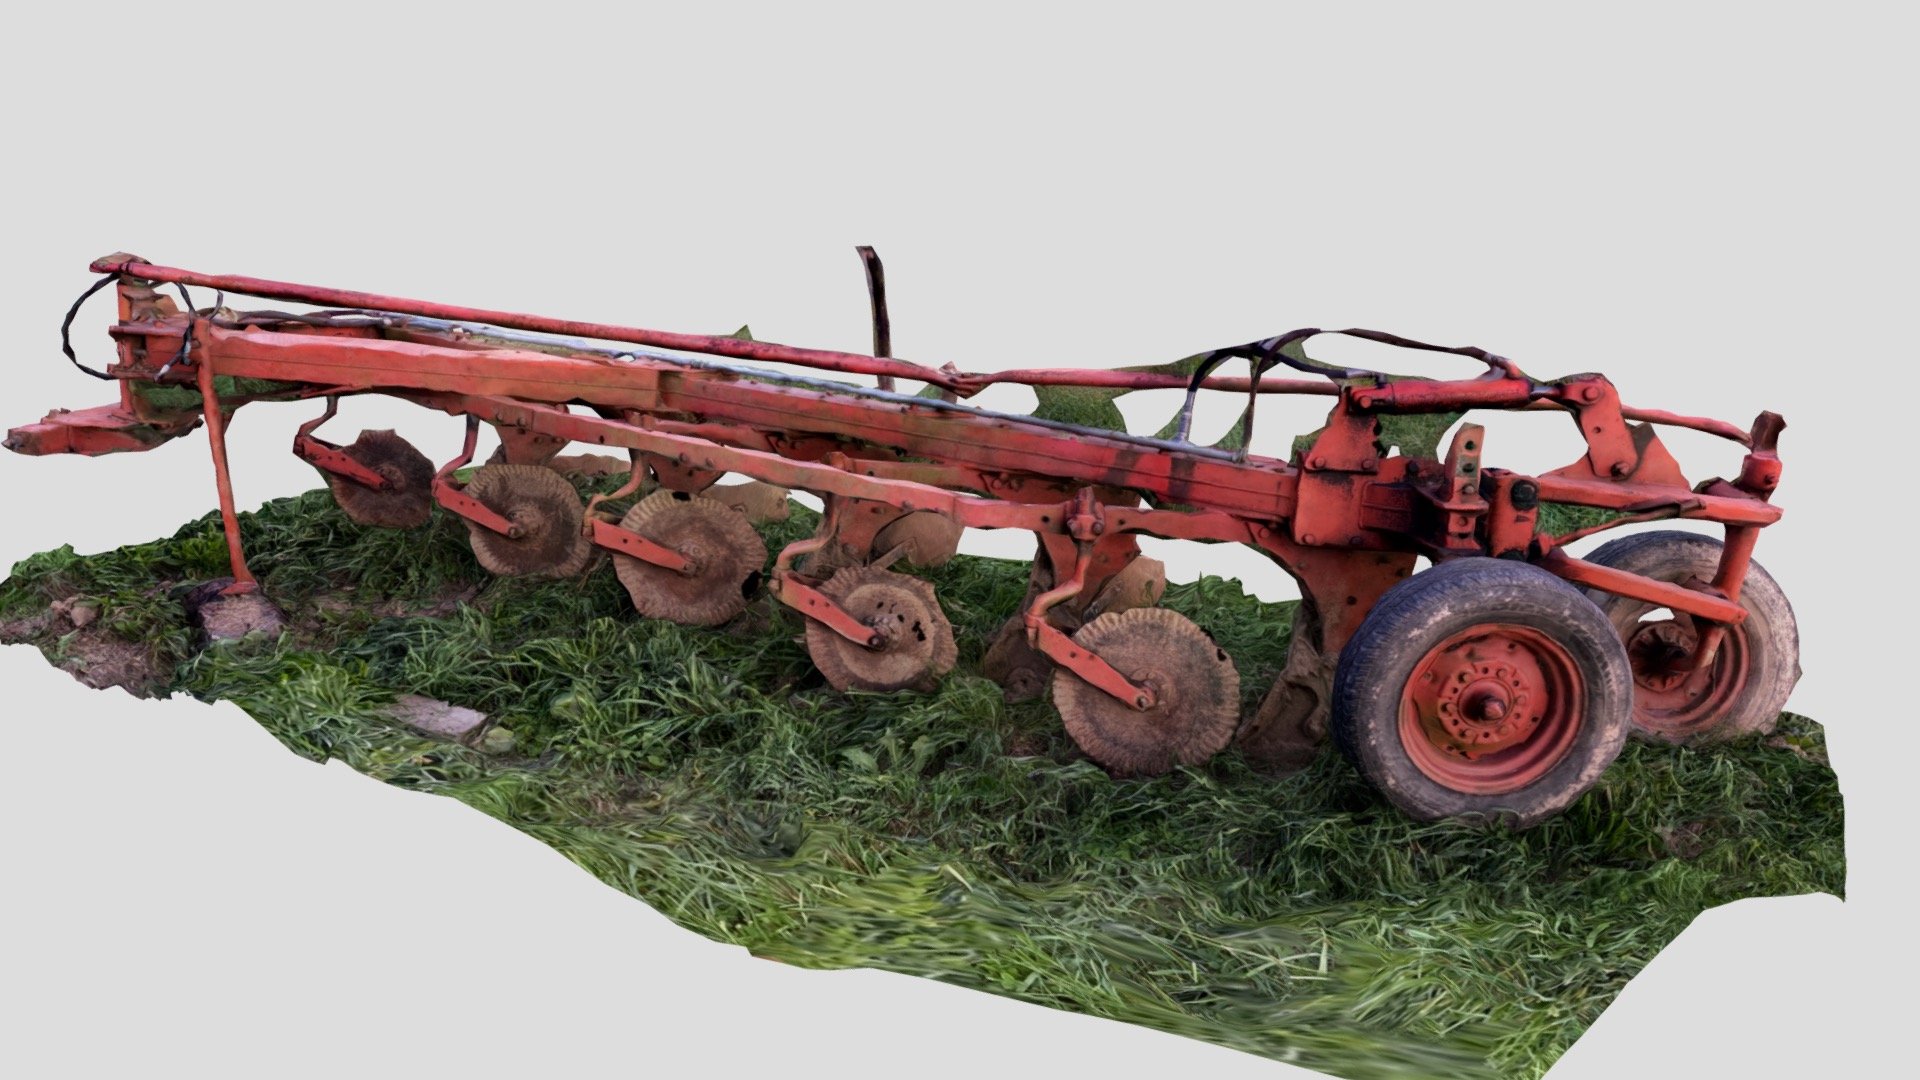 3D Scan of a moldboard plow. In a hay farm near Bear, Delaware. (75 Images, Photo Mode)

Created with Polycam - Day 041: Moldboard Plow - Buy Royalty Free 3D model by uttamg911 3d model